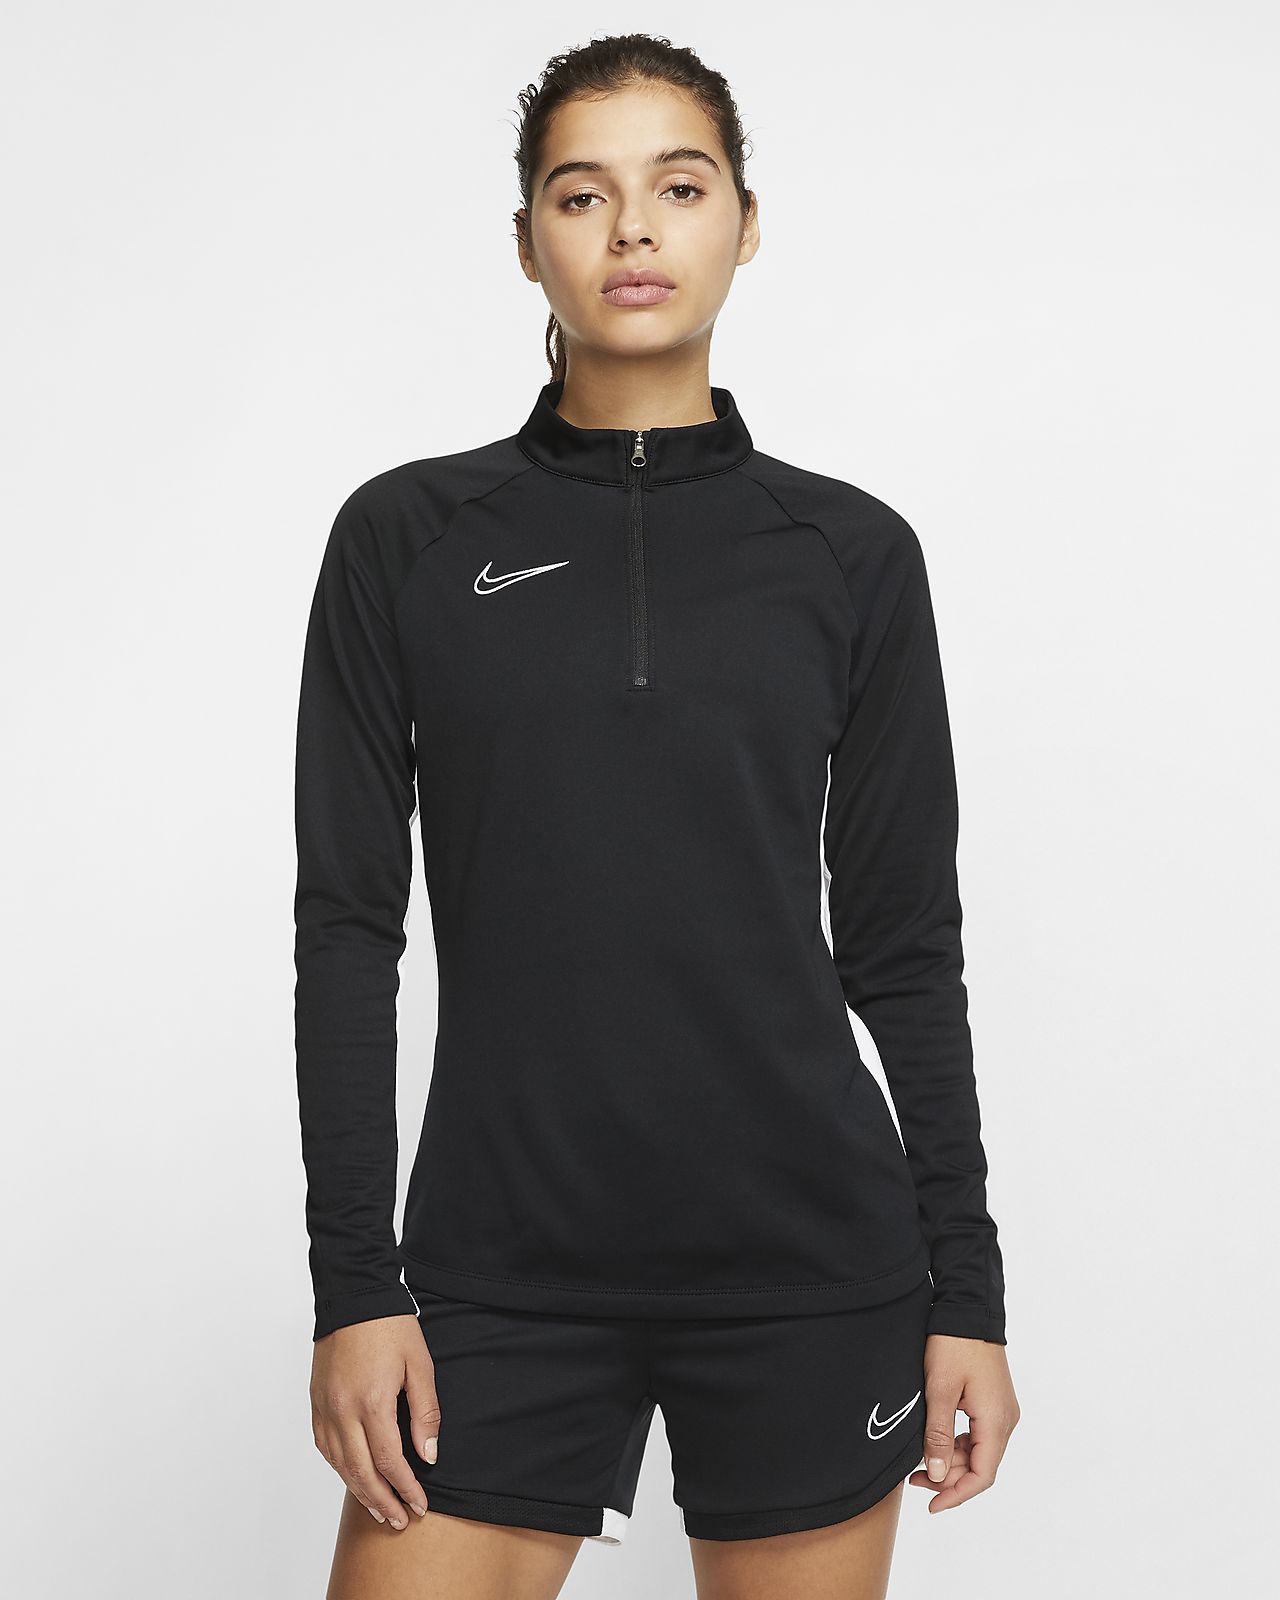 nike men's dry academy 18 drill long sleeve top